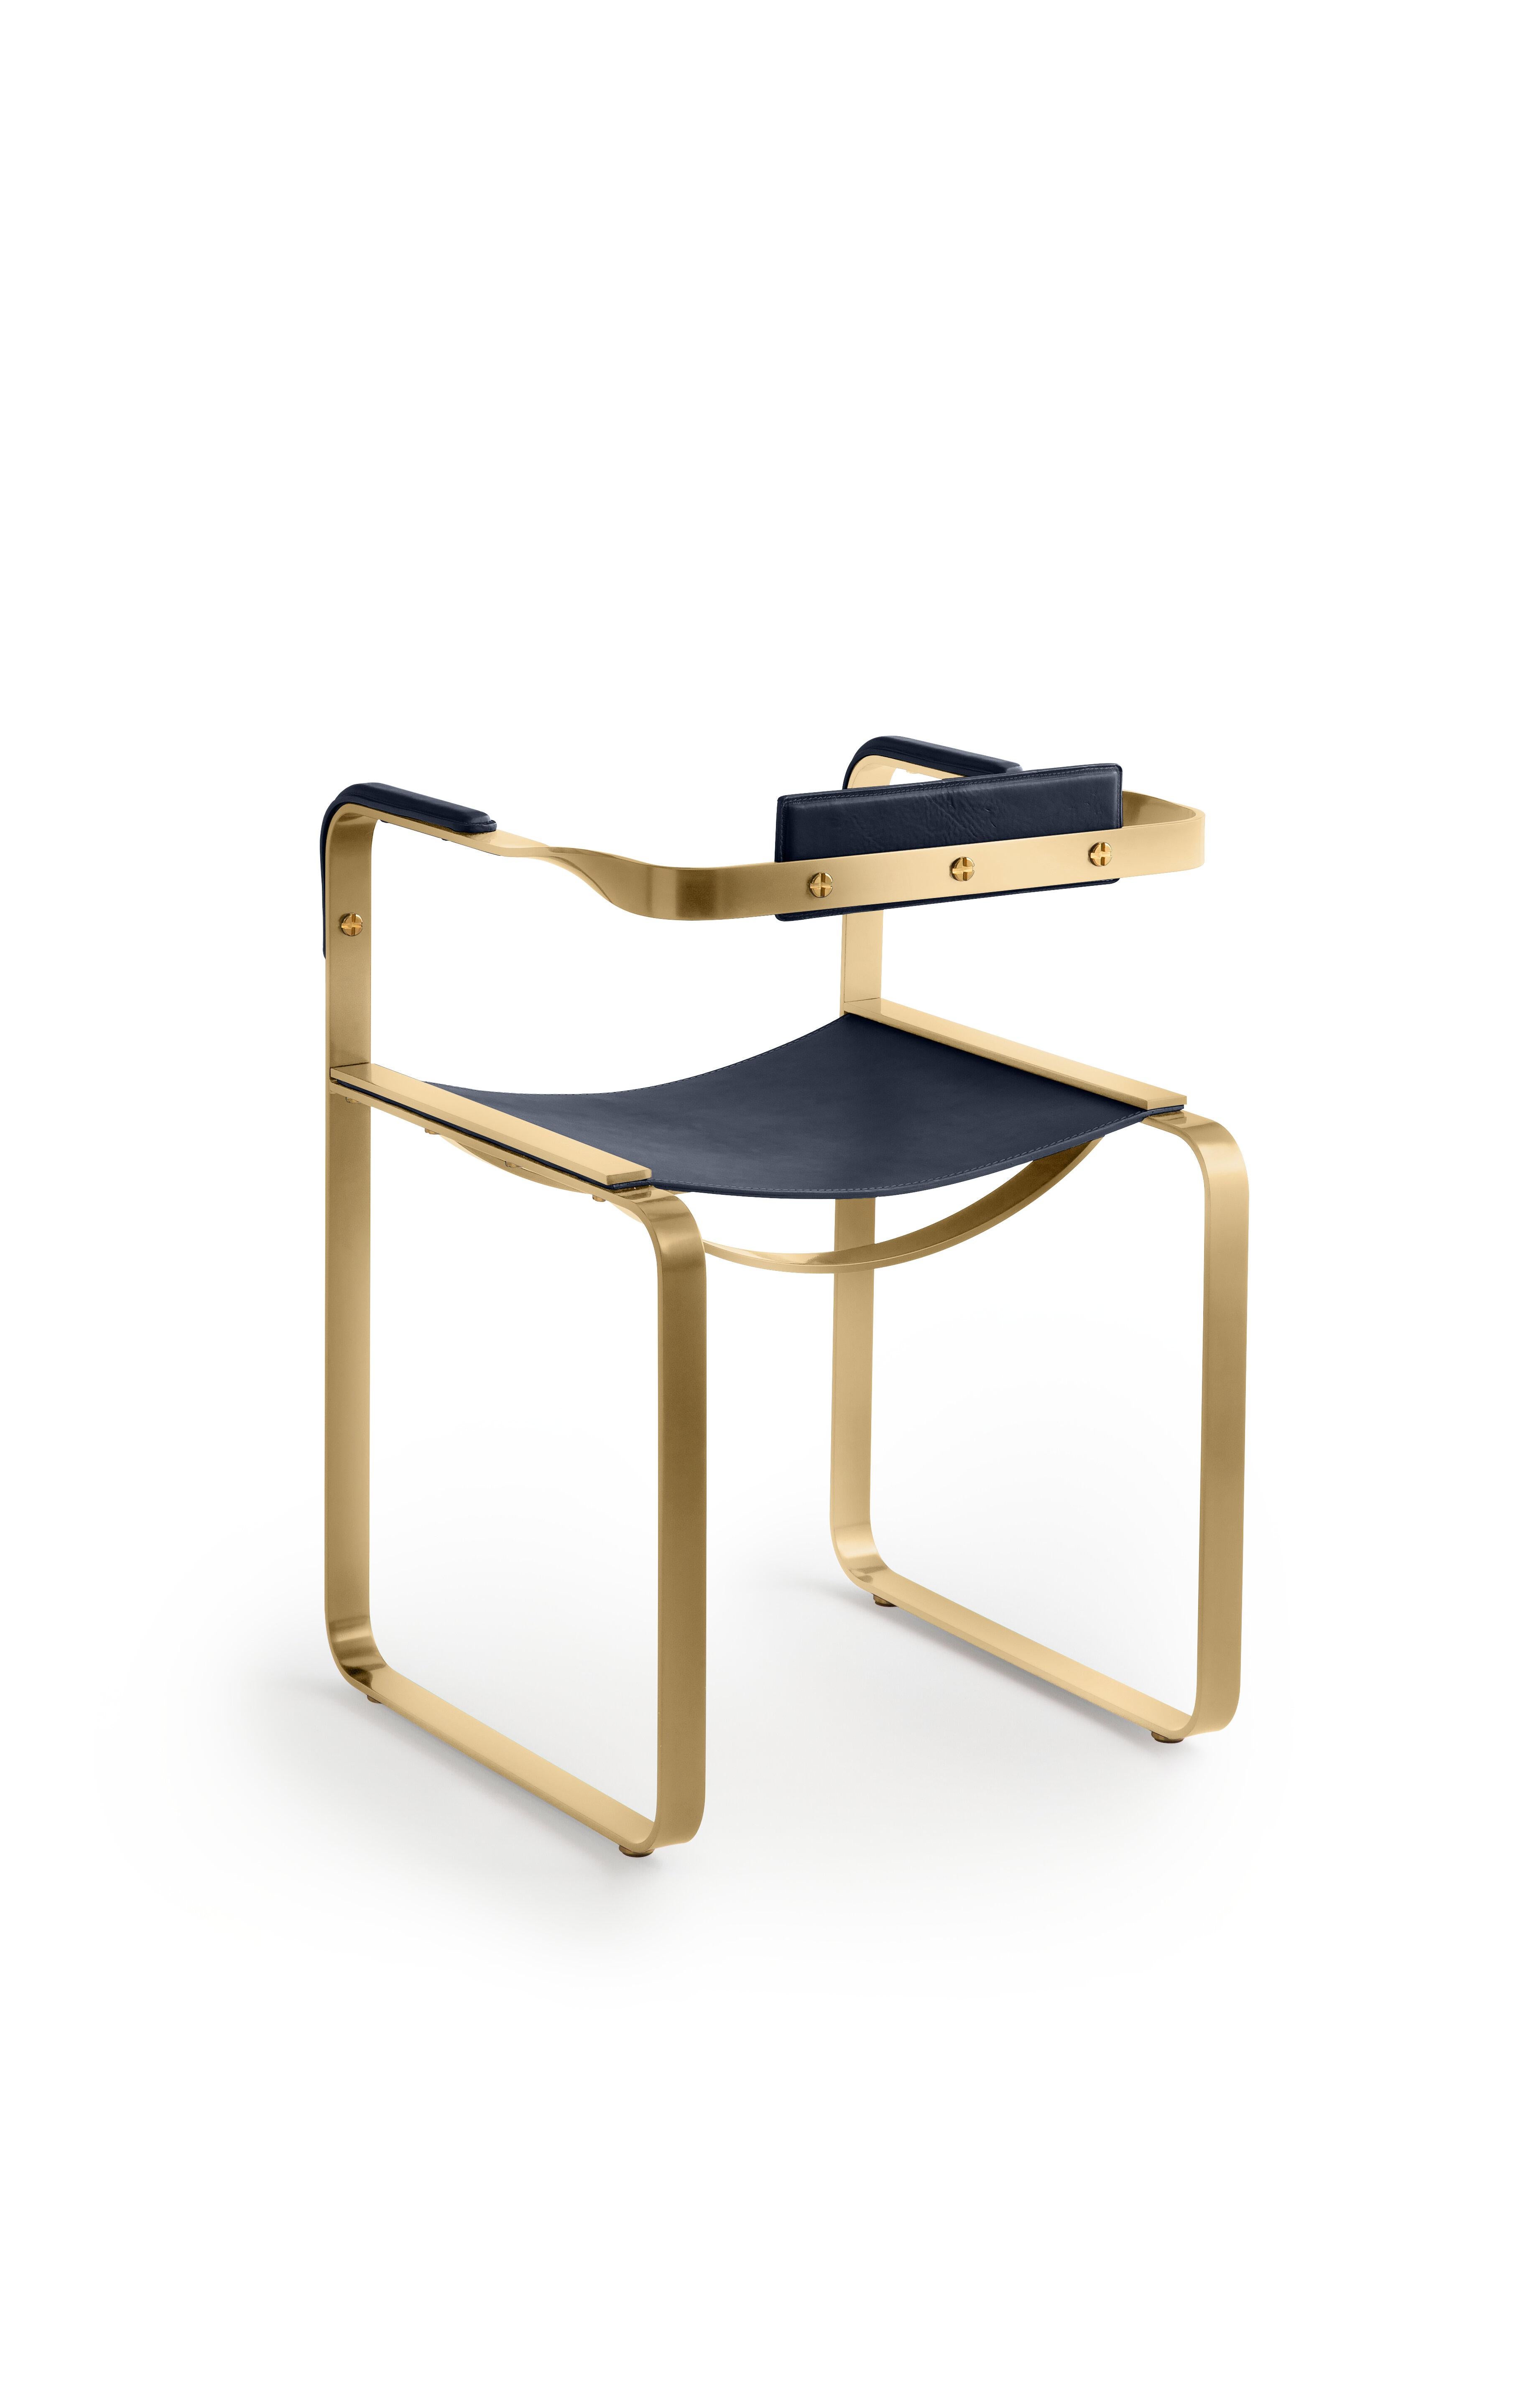 Minimalist Set of 3 Armchair, Aged Brass Steel & Blue Navy Saddle, Contemporary Style For Sale